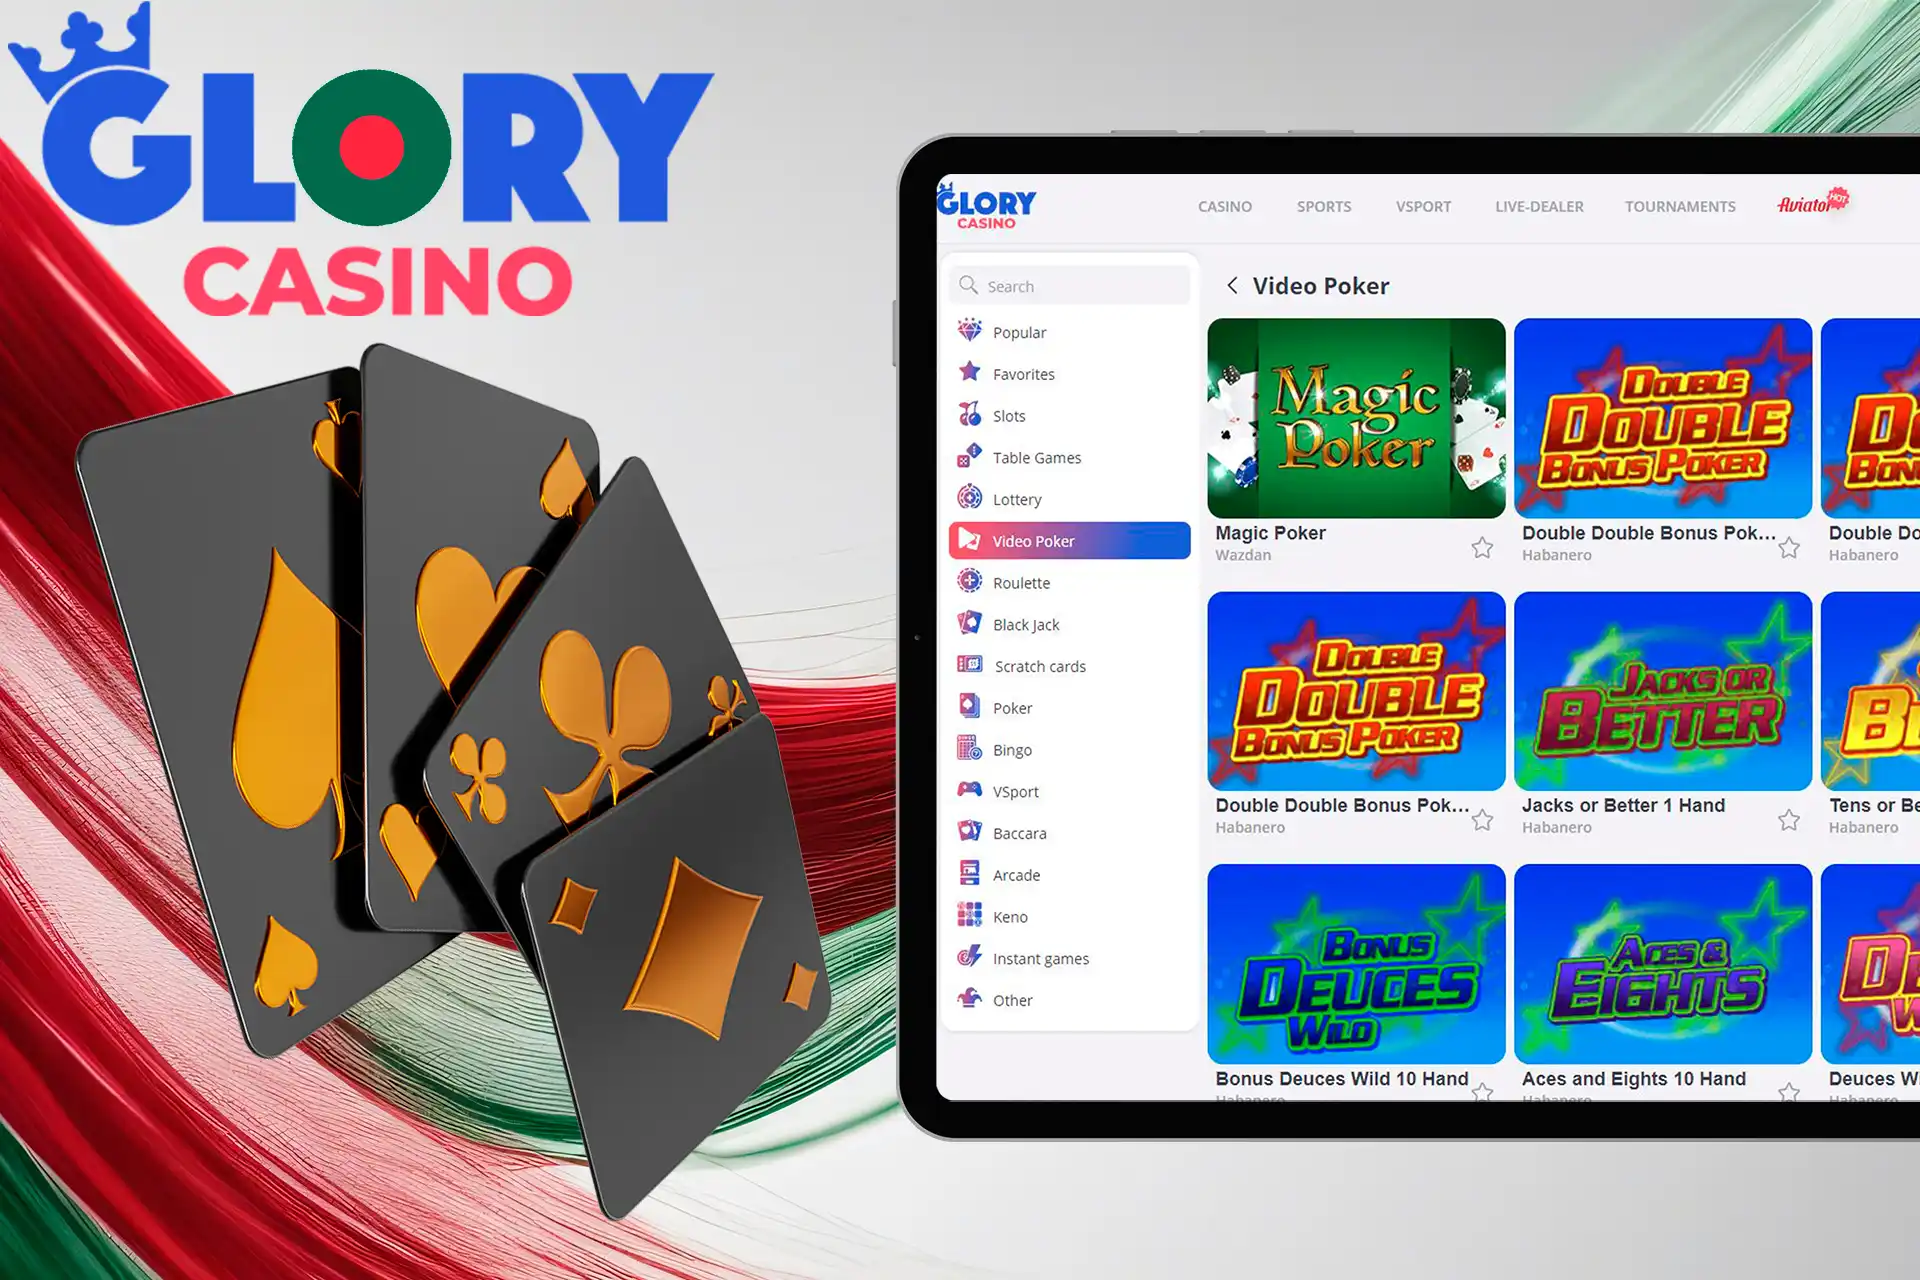 Try your luck playing Video Poker at Glory Casino Bangladesh